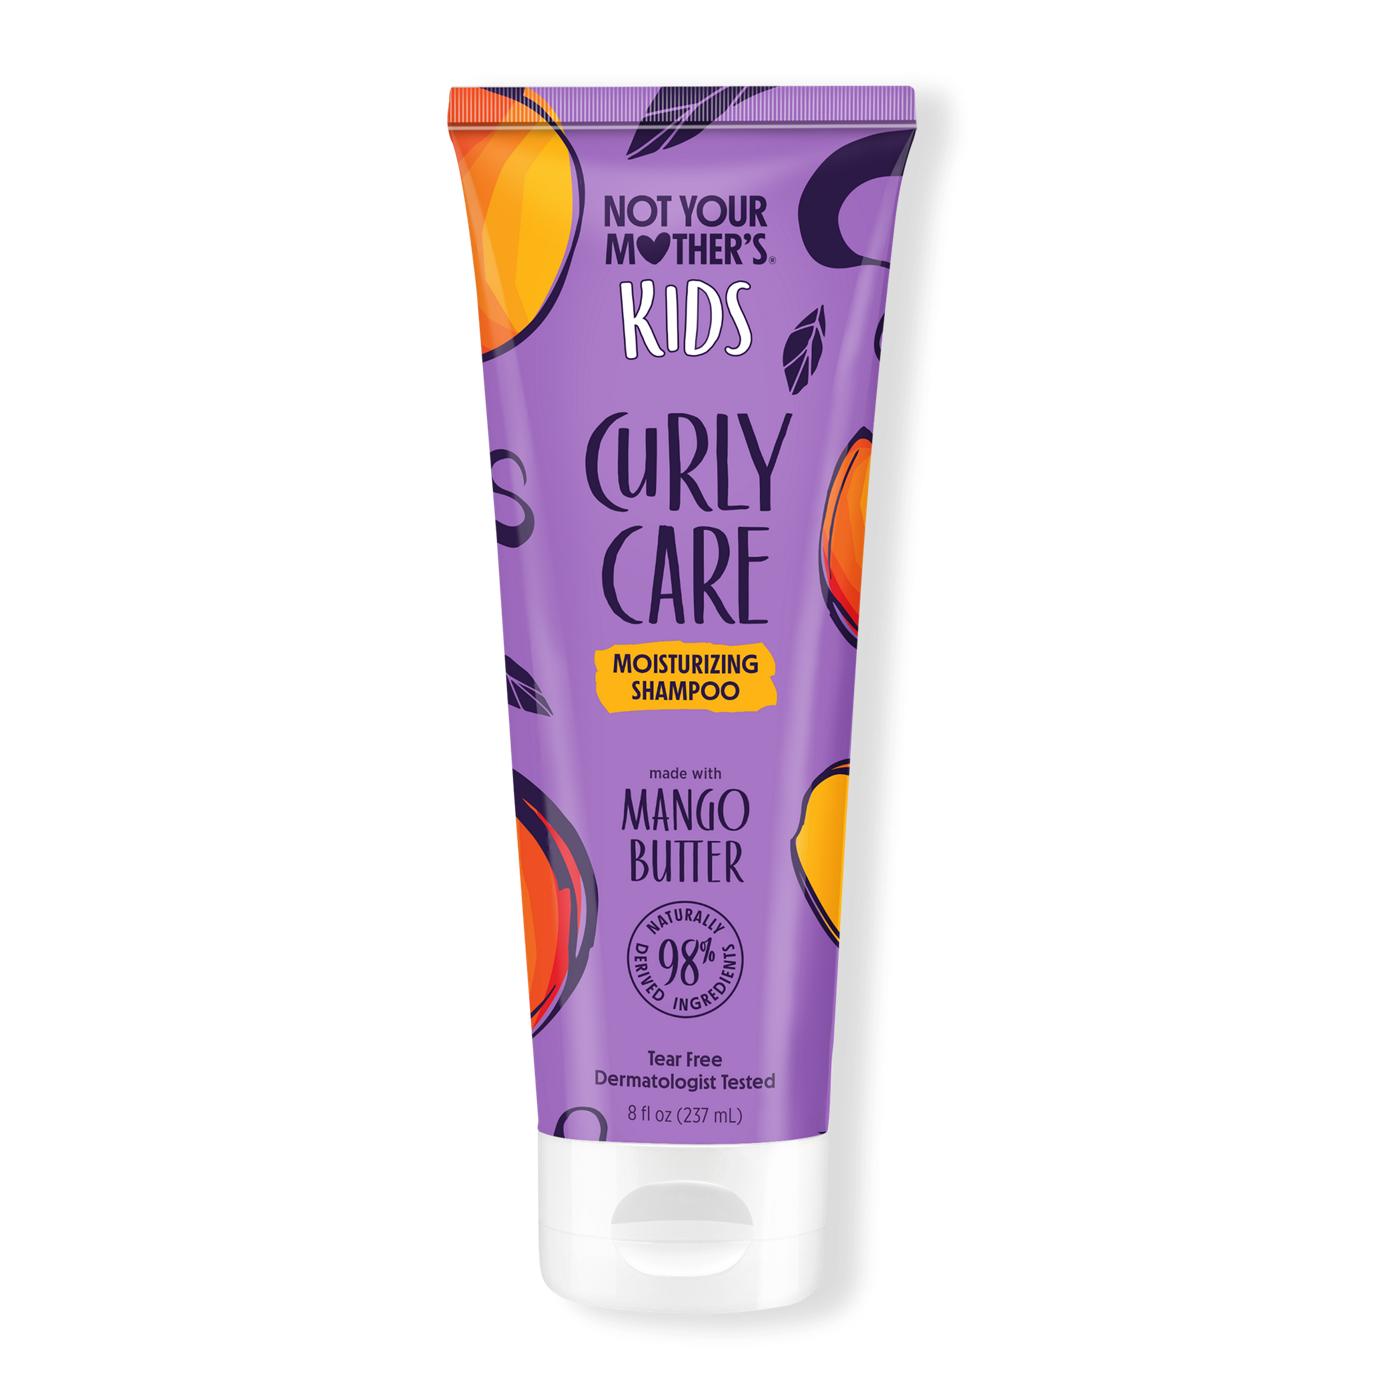 Not Your Mother's Kids Curly Care Moisturizing Shampoo; image 1 of 2